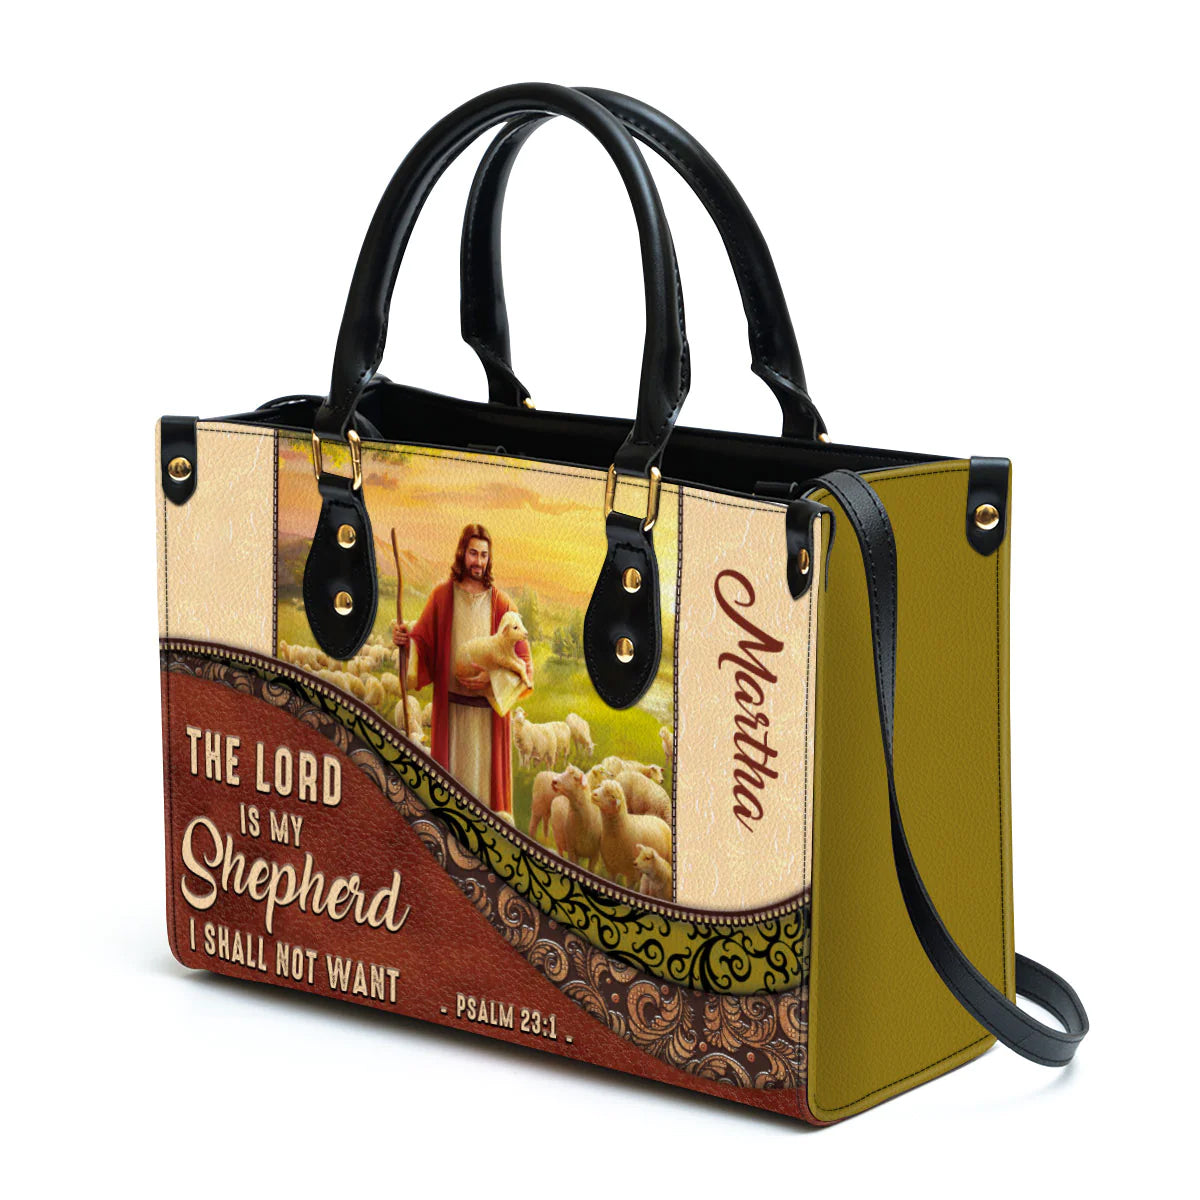 Christianart Designer Handbags, The Lord Is My Shepherd PSALM 23:1, Personalized Gifts, Gifts for Women. - Christian Art Bag